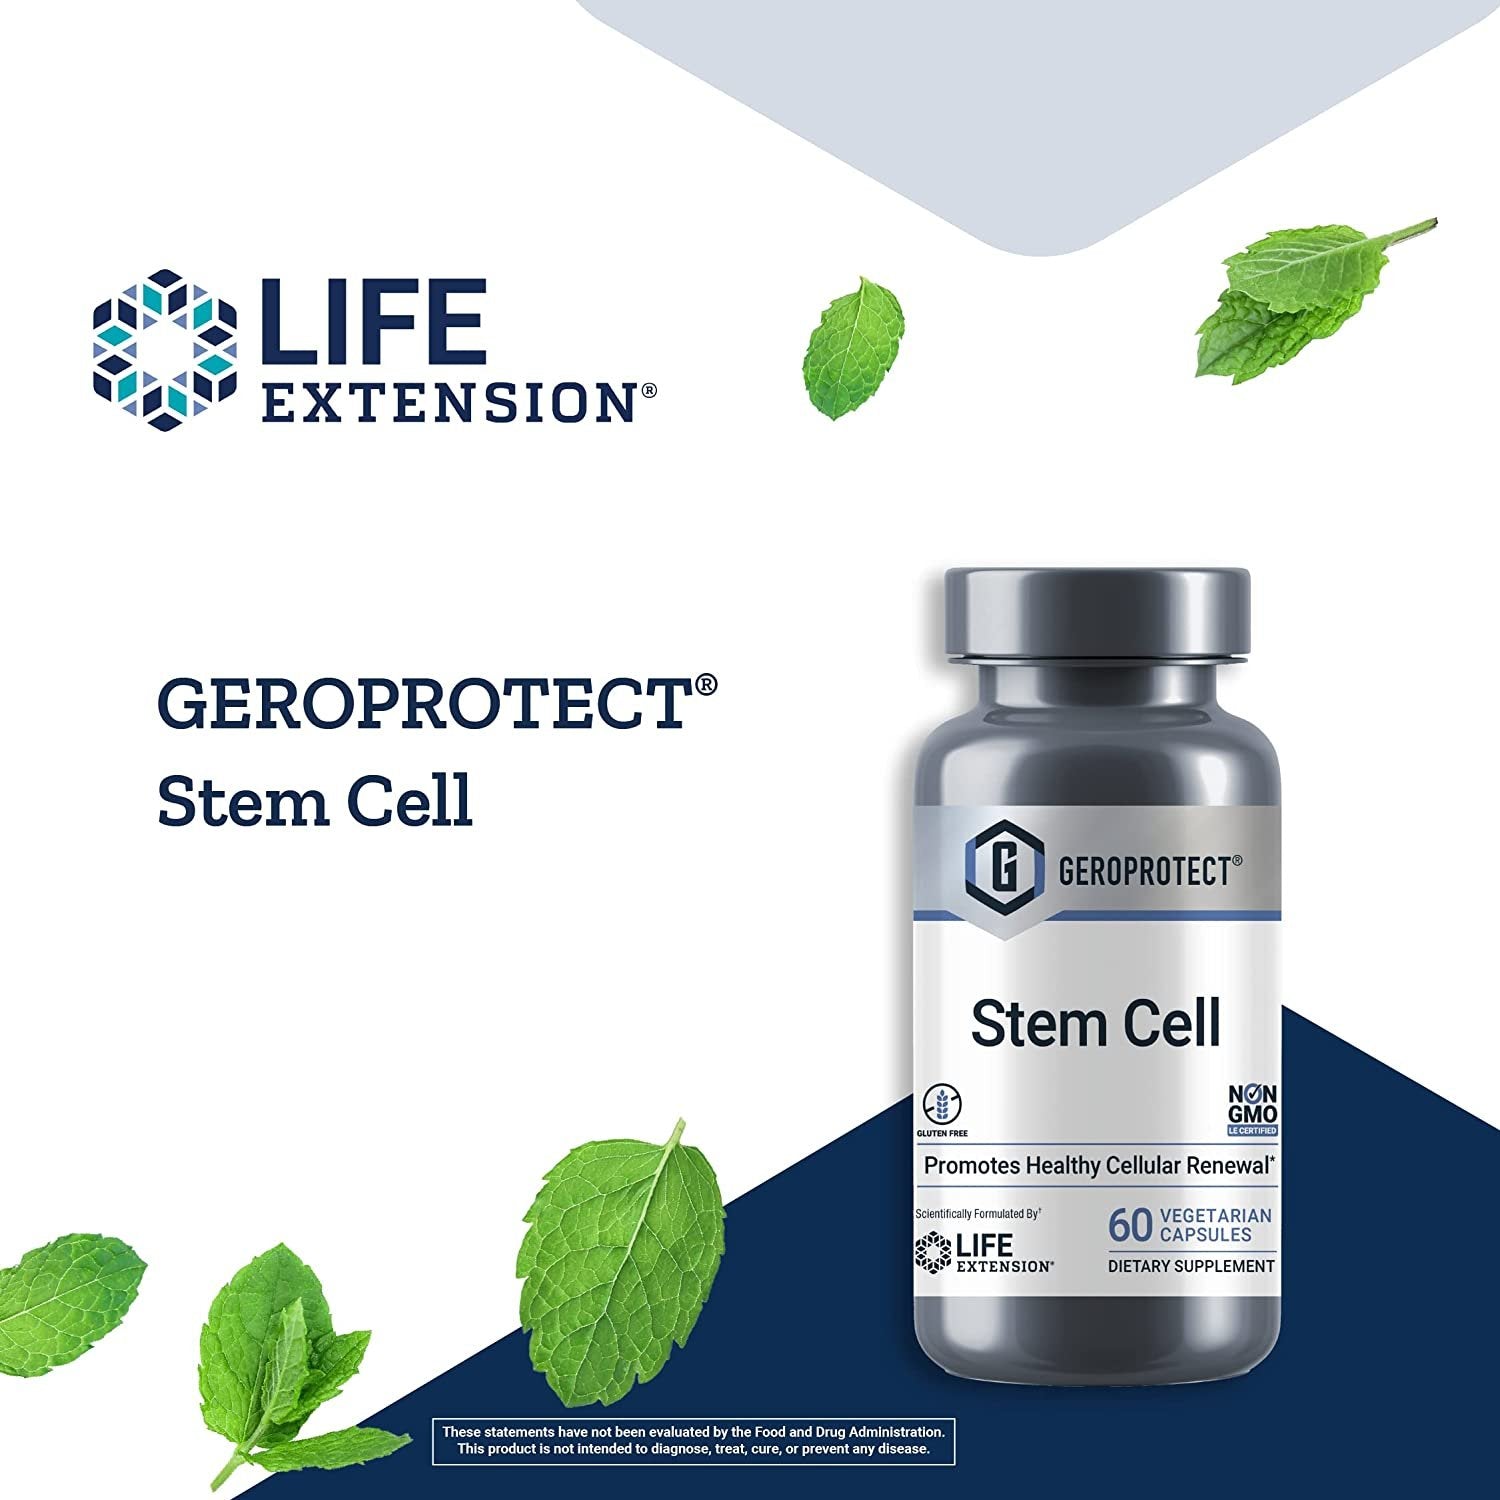 Life Extension GeroProtect Stem Cell - Healthy Cell Support Plant-Based Nutrients Formula Supplement Pills for Anti-Aging & Longevity - Non-GMO, Gluten-Free, Vegetarian - 60 Capsules